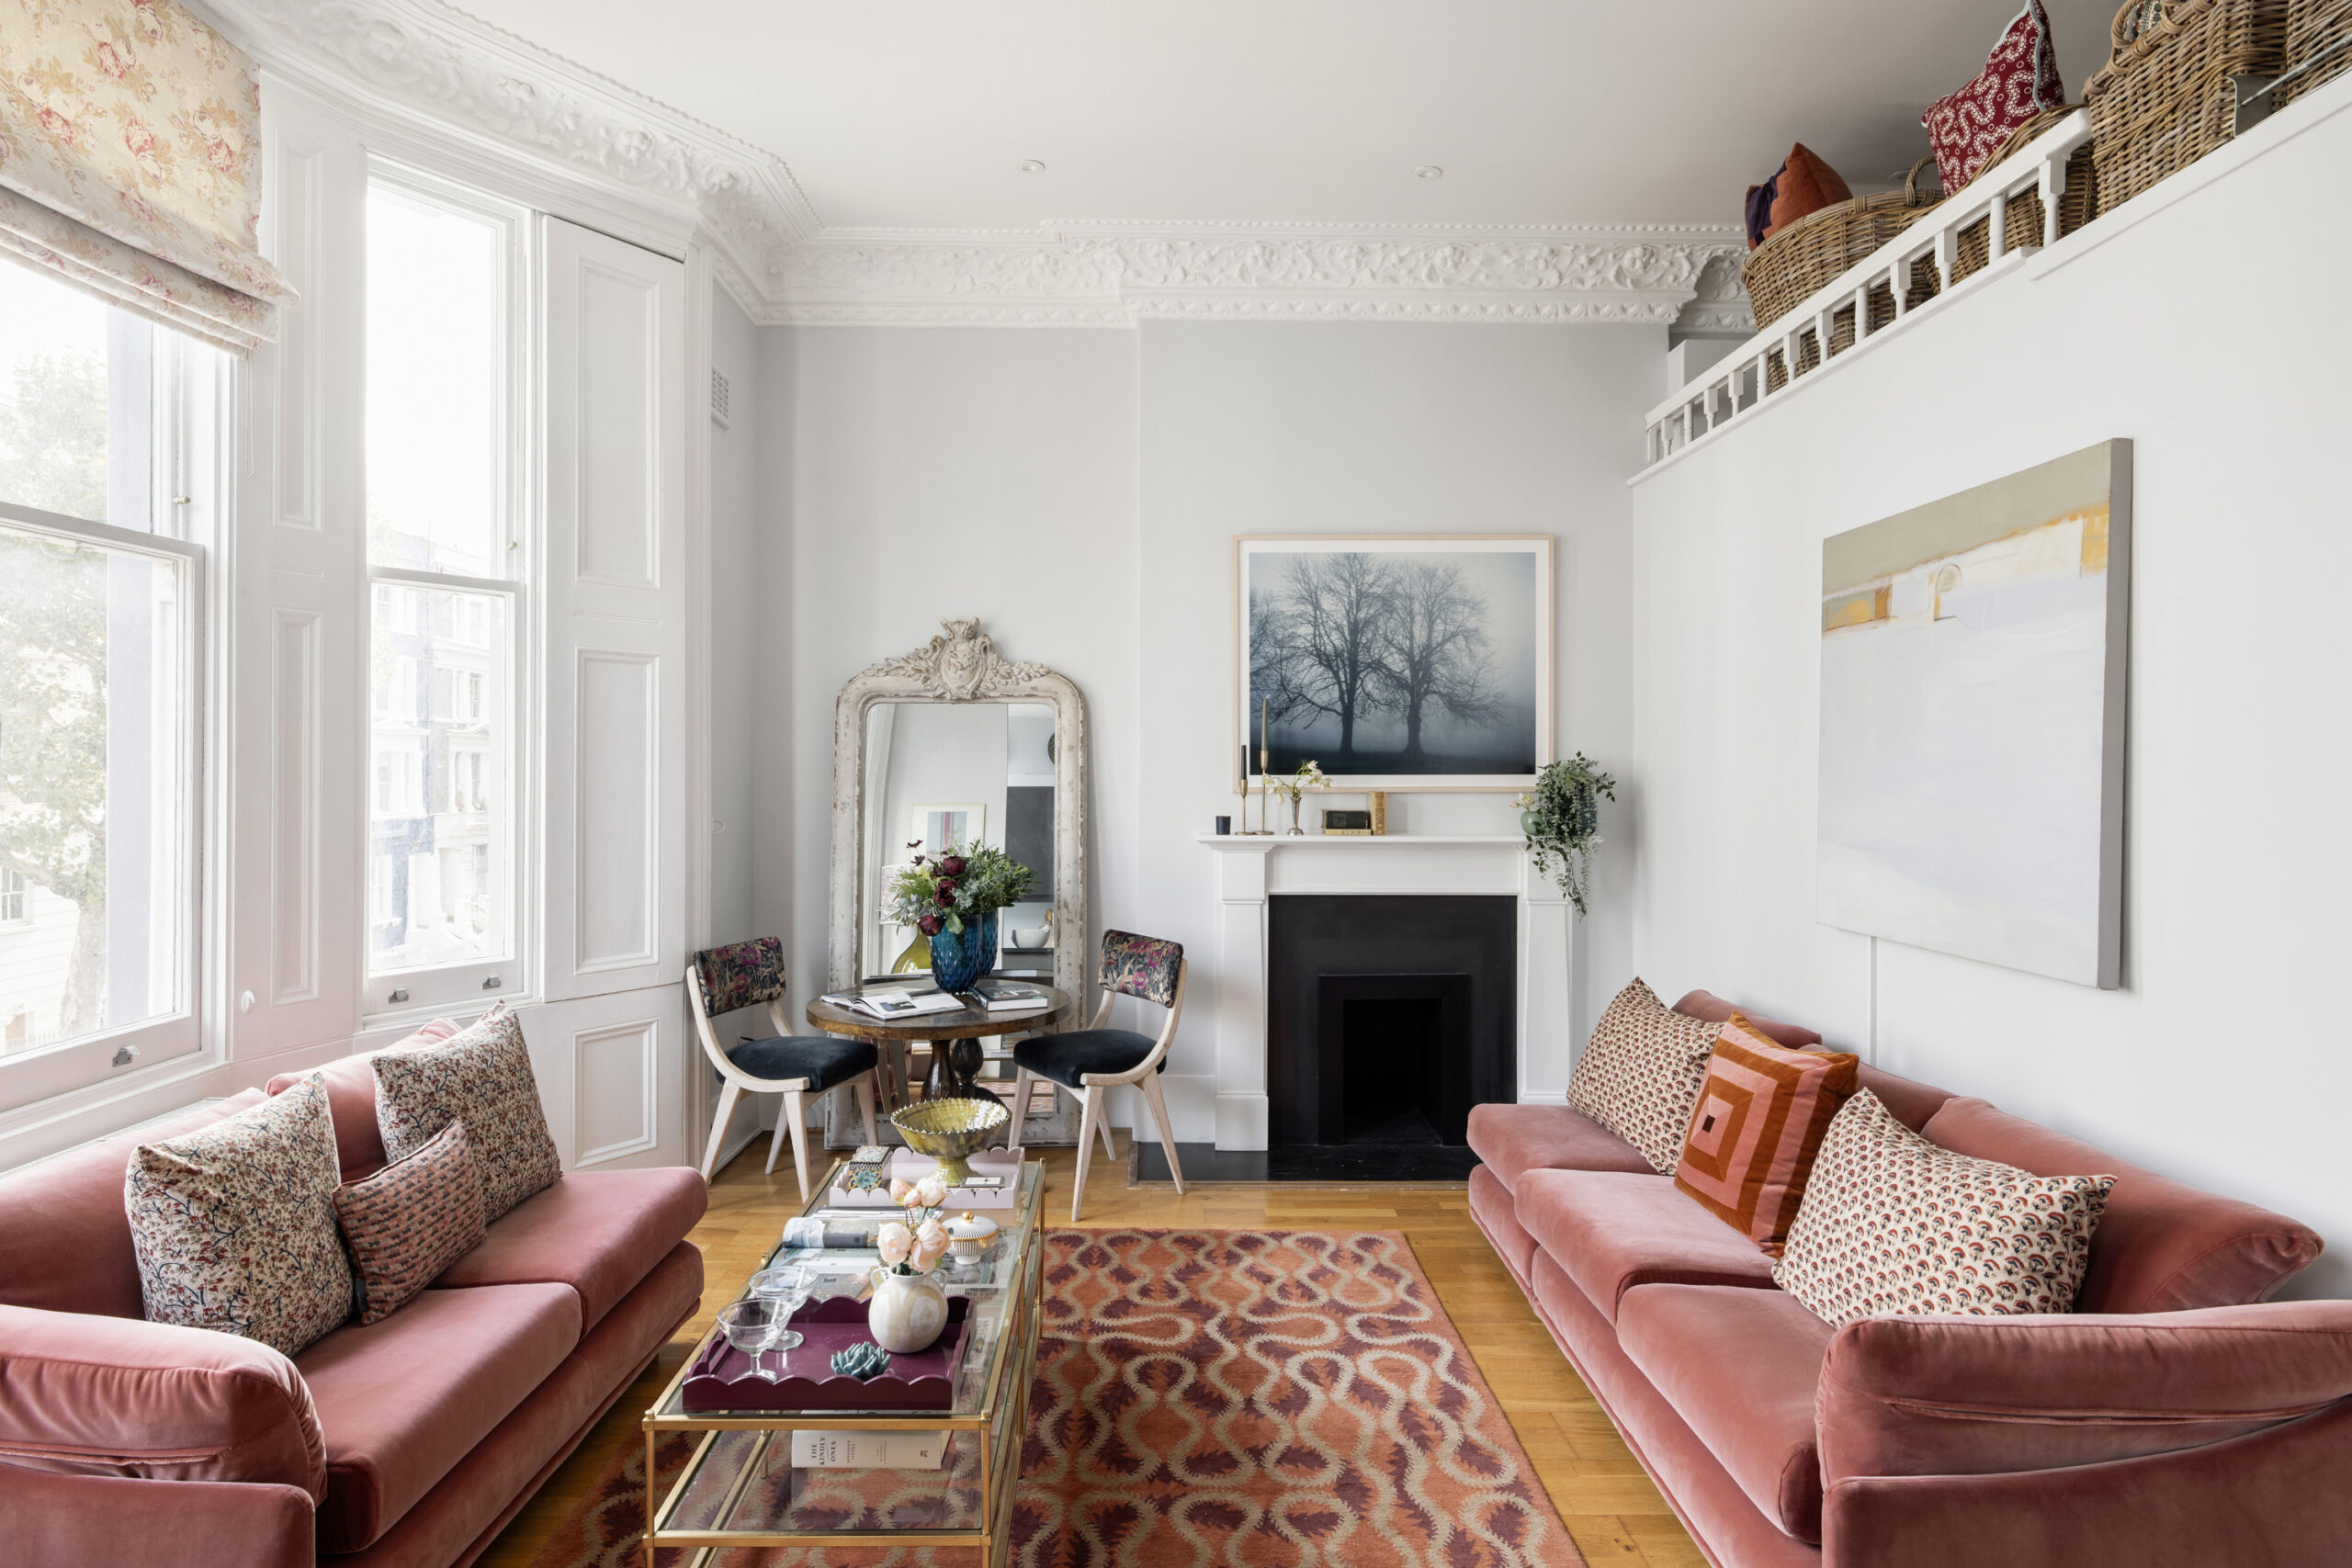 Luxurious elegant interior of an apartment for sale in Notting Hill